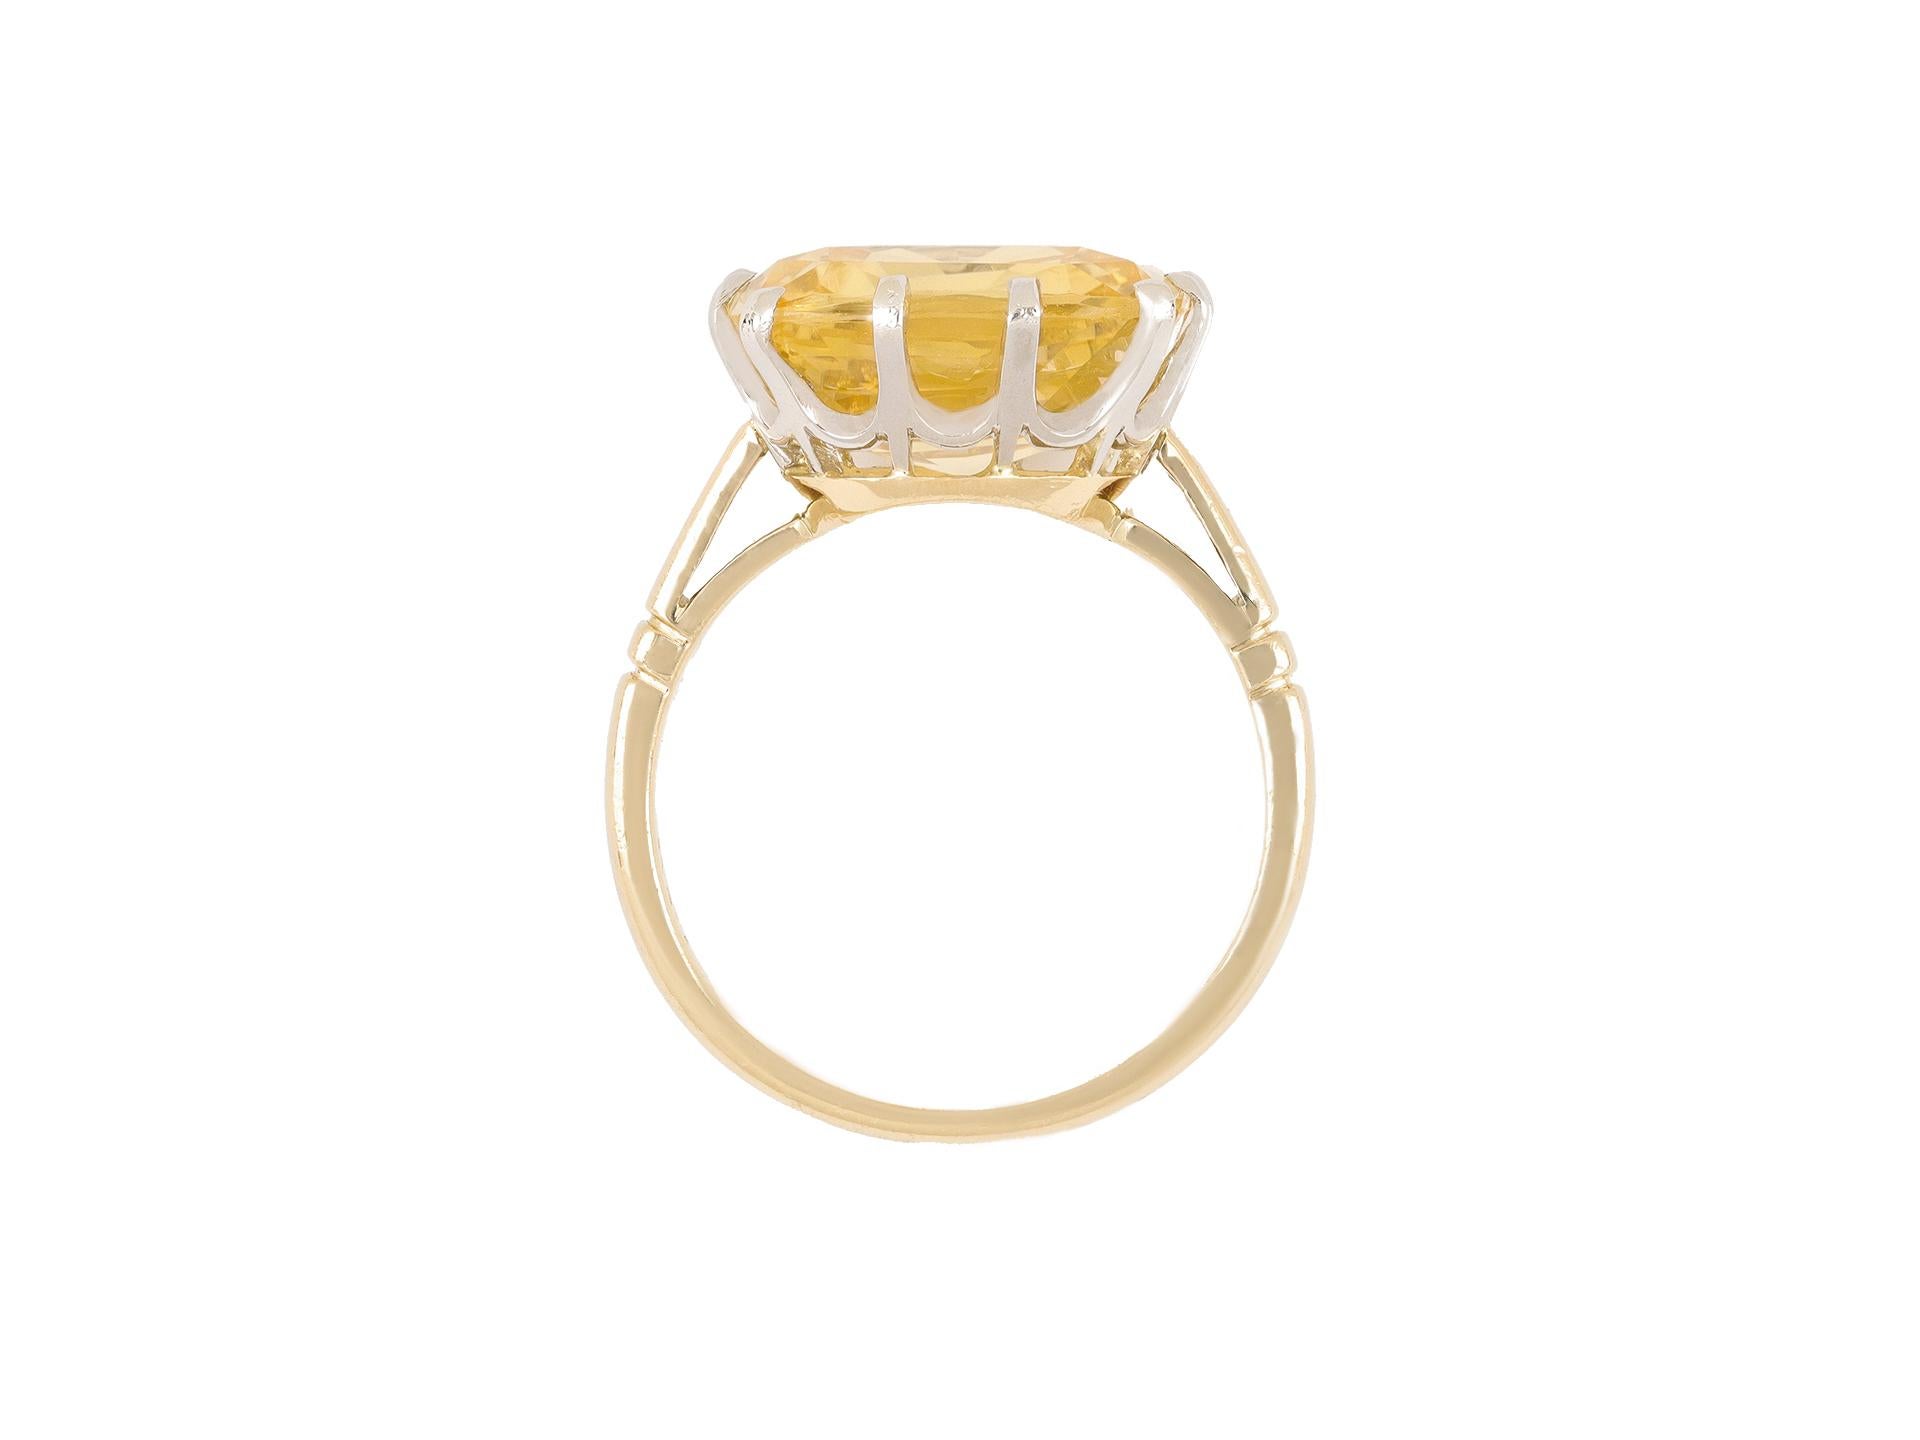 Yellow Ceylon sapphire solitaire ring. Set with a cushion cut natural unenhanced yellow Ceylon sapphire in an open back claw setting with an approximate weight of 13.30 carats, to an elegant solitaire design featuring curving claws, an intricate